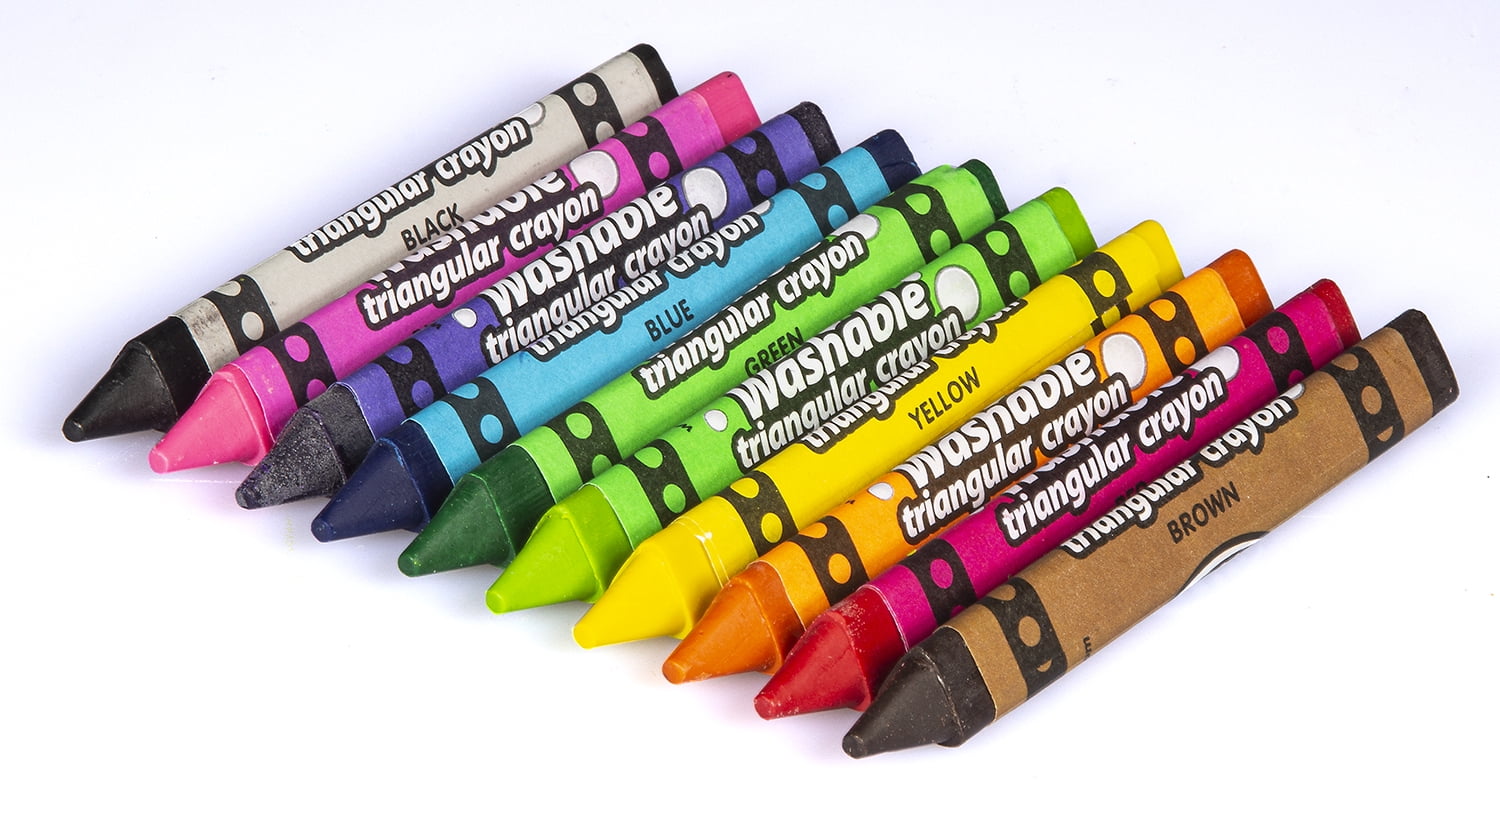 Crayola Crayons, Large Triangular Washable My First 8 ct - 4 (101.60 mm)  Length - Assorted - 8 / Set - Mills